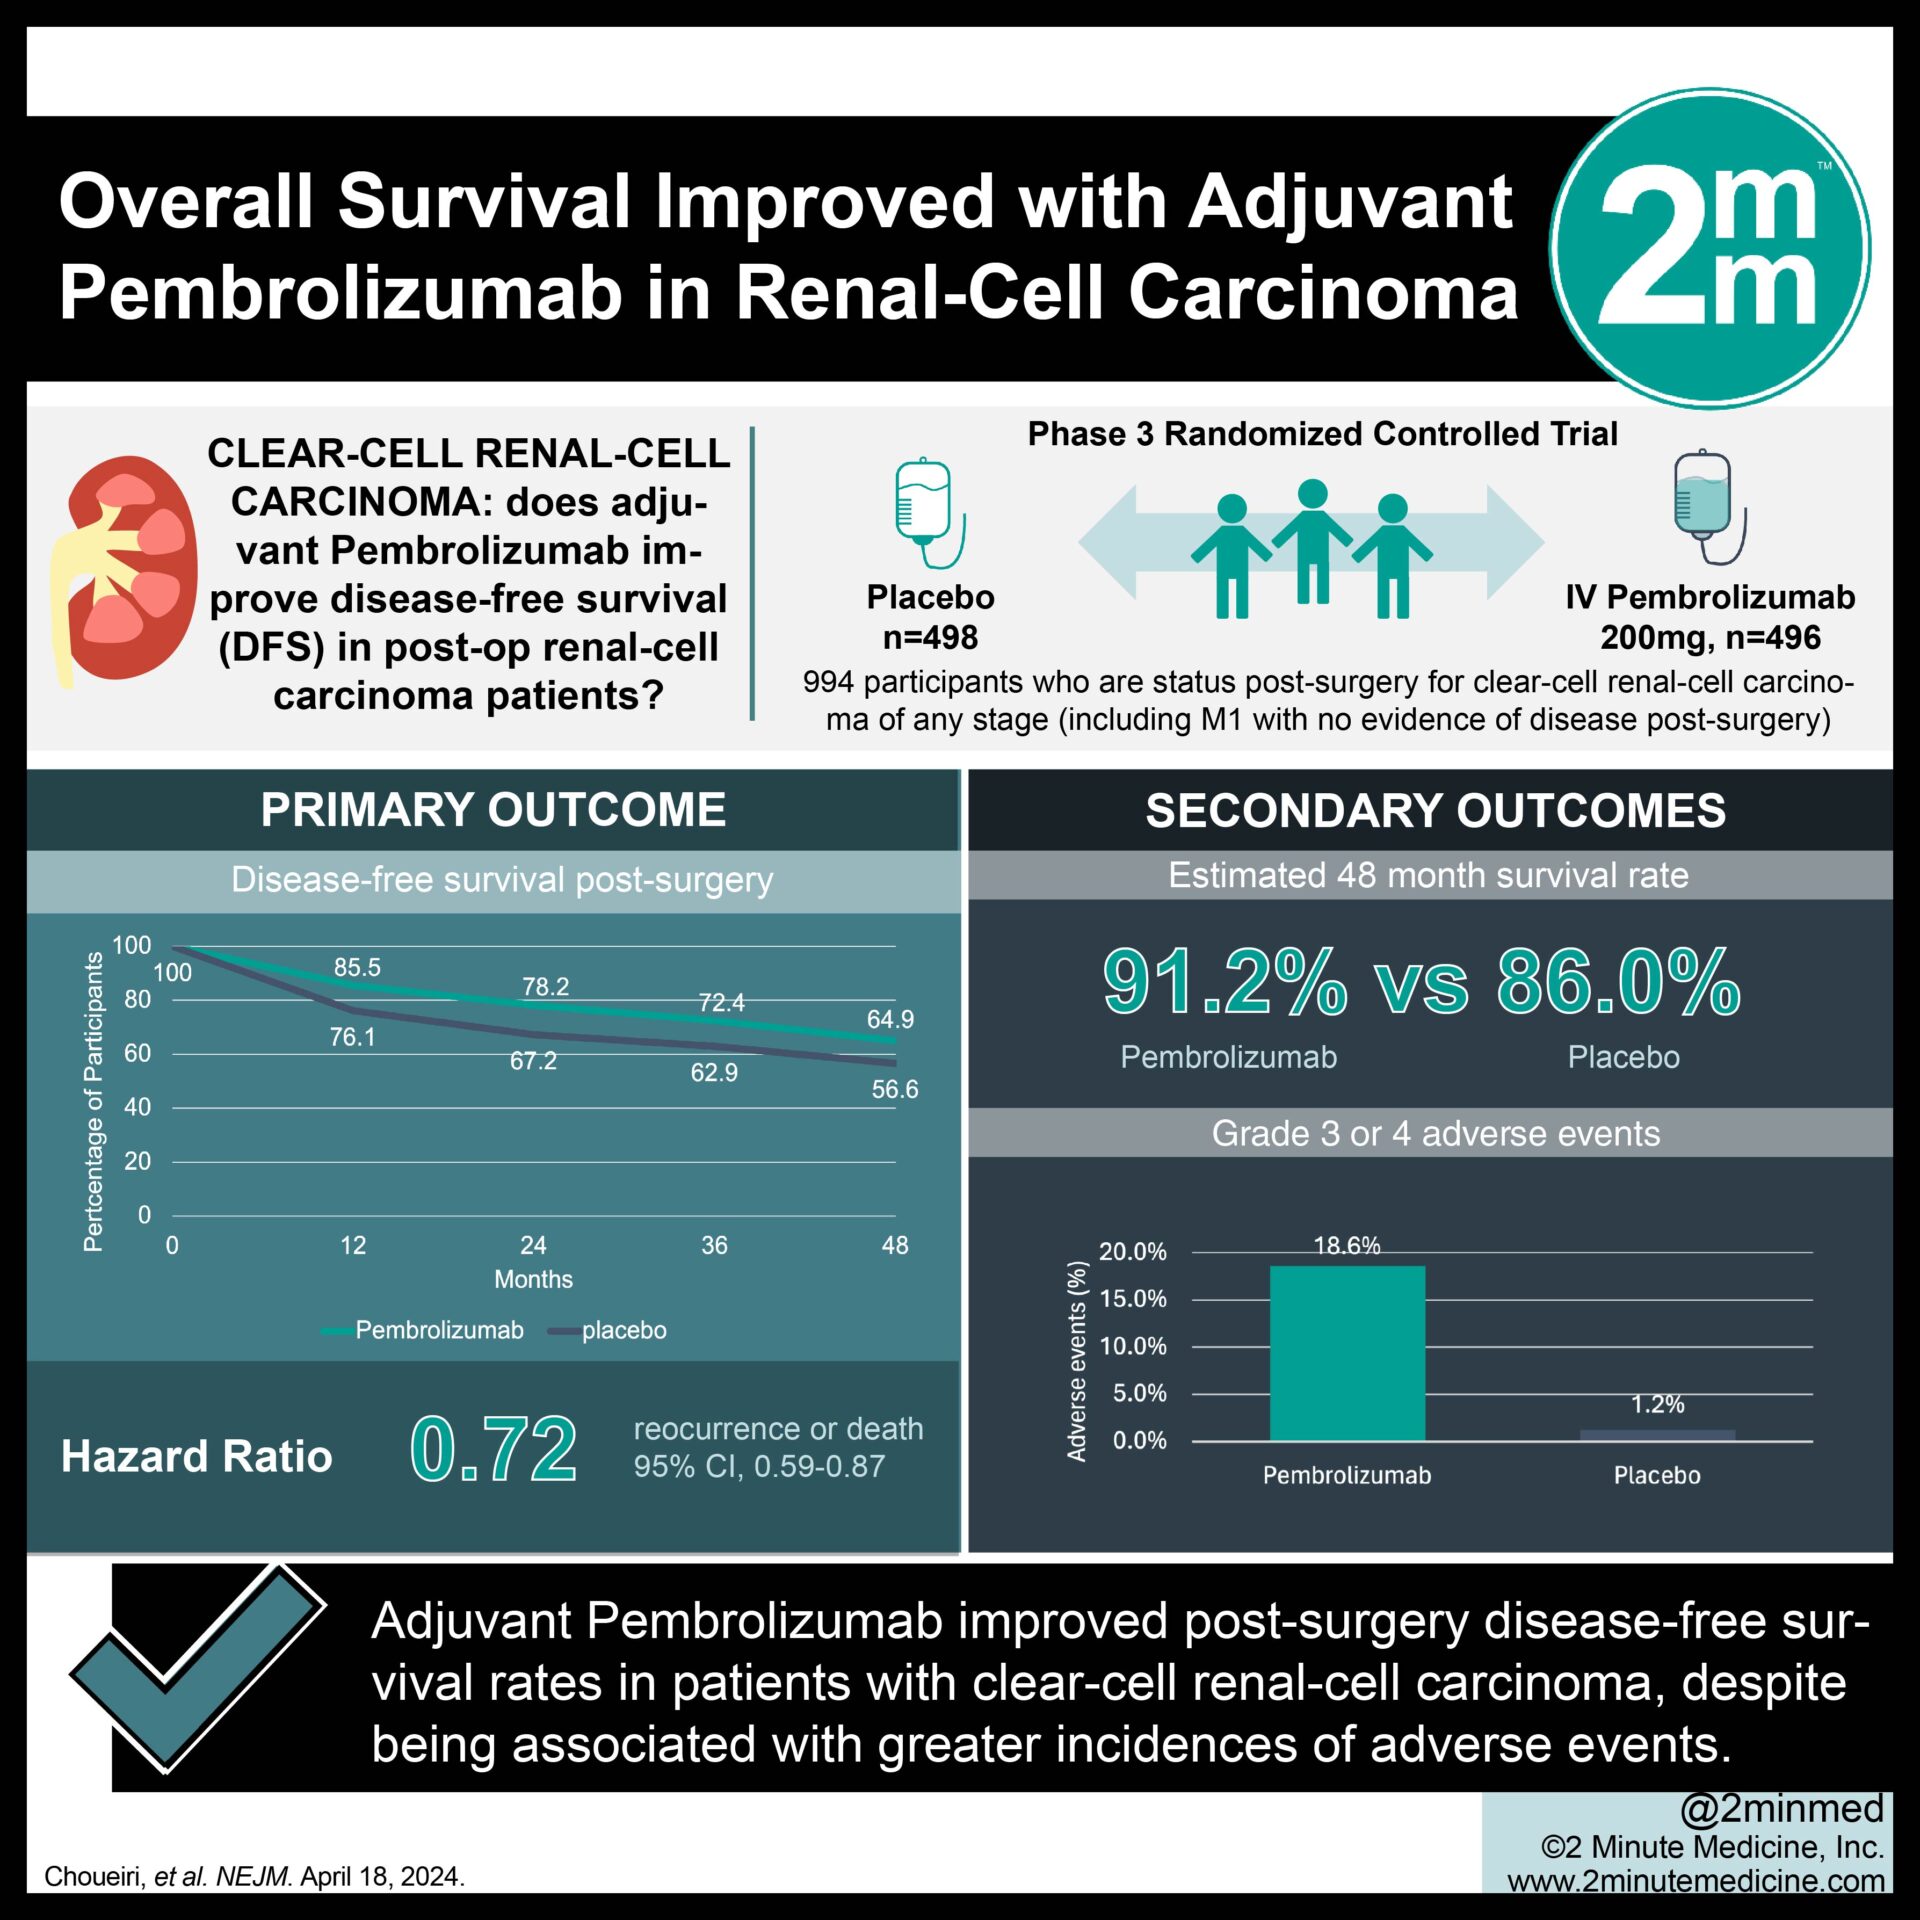 #VisualAbstract: Overall Survival Improved with Adjuvant Pembrolizumab in Renal-Cell Carcinoma